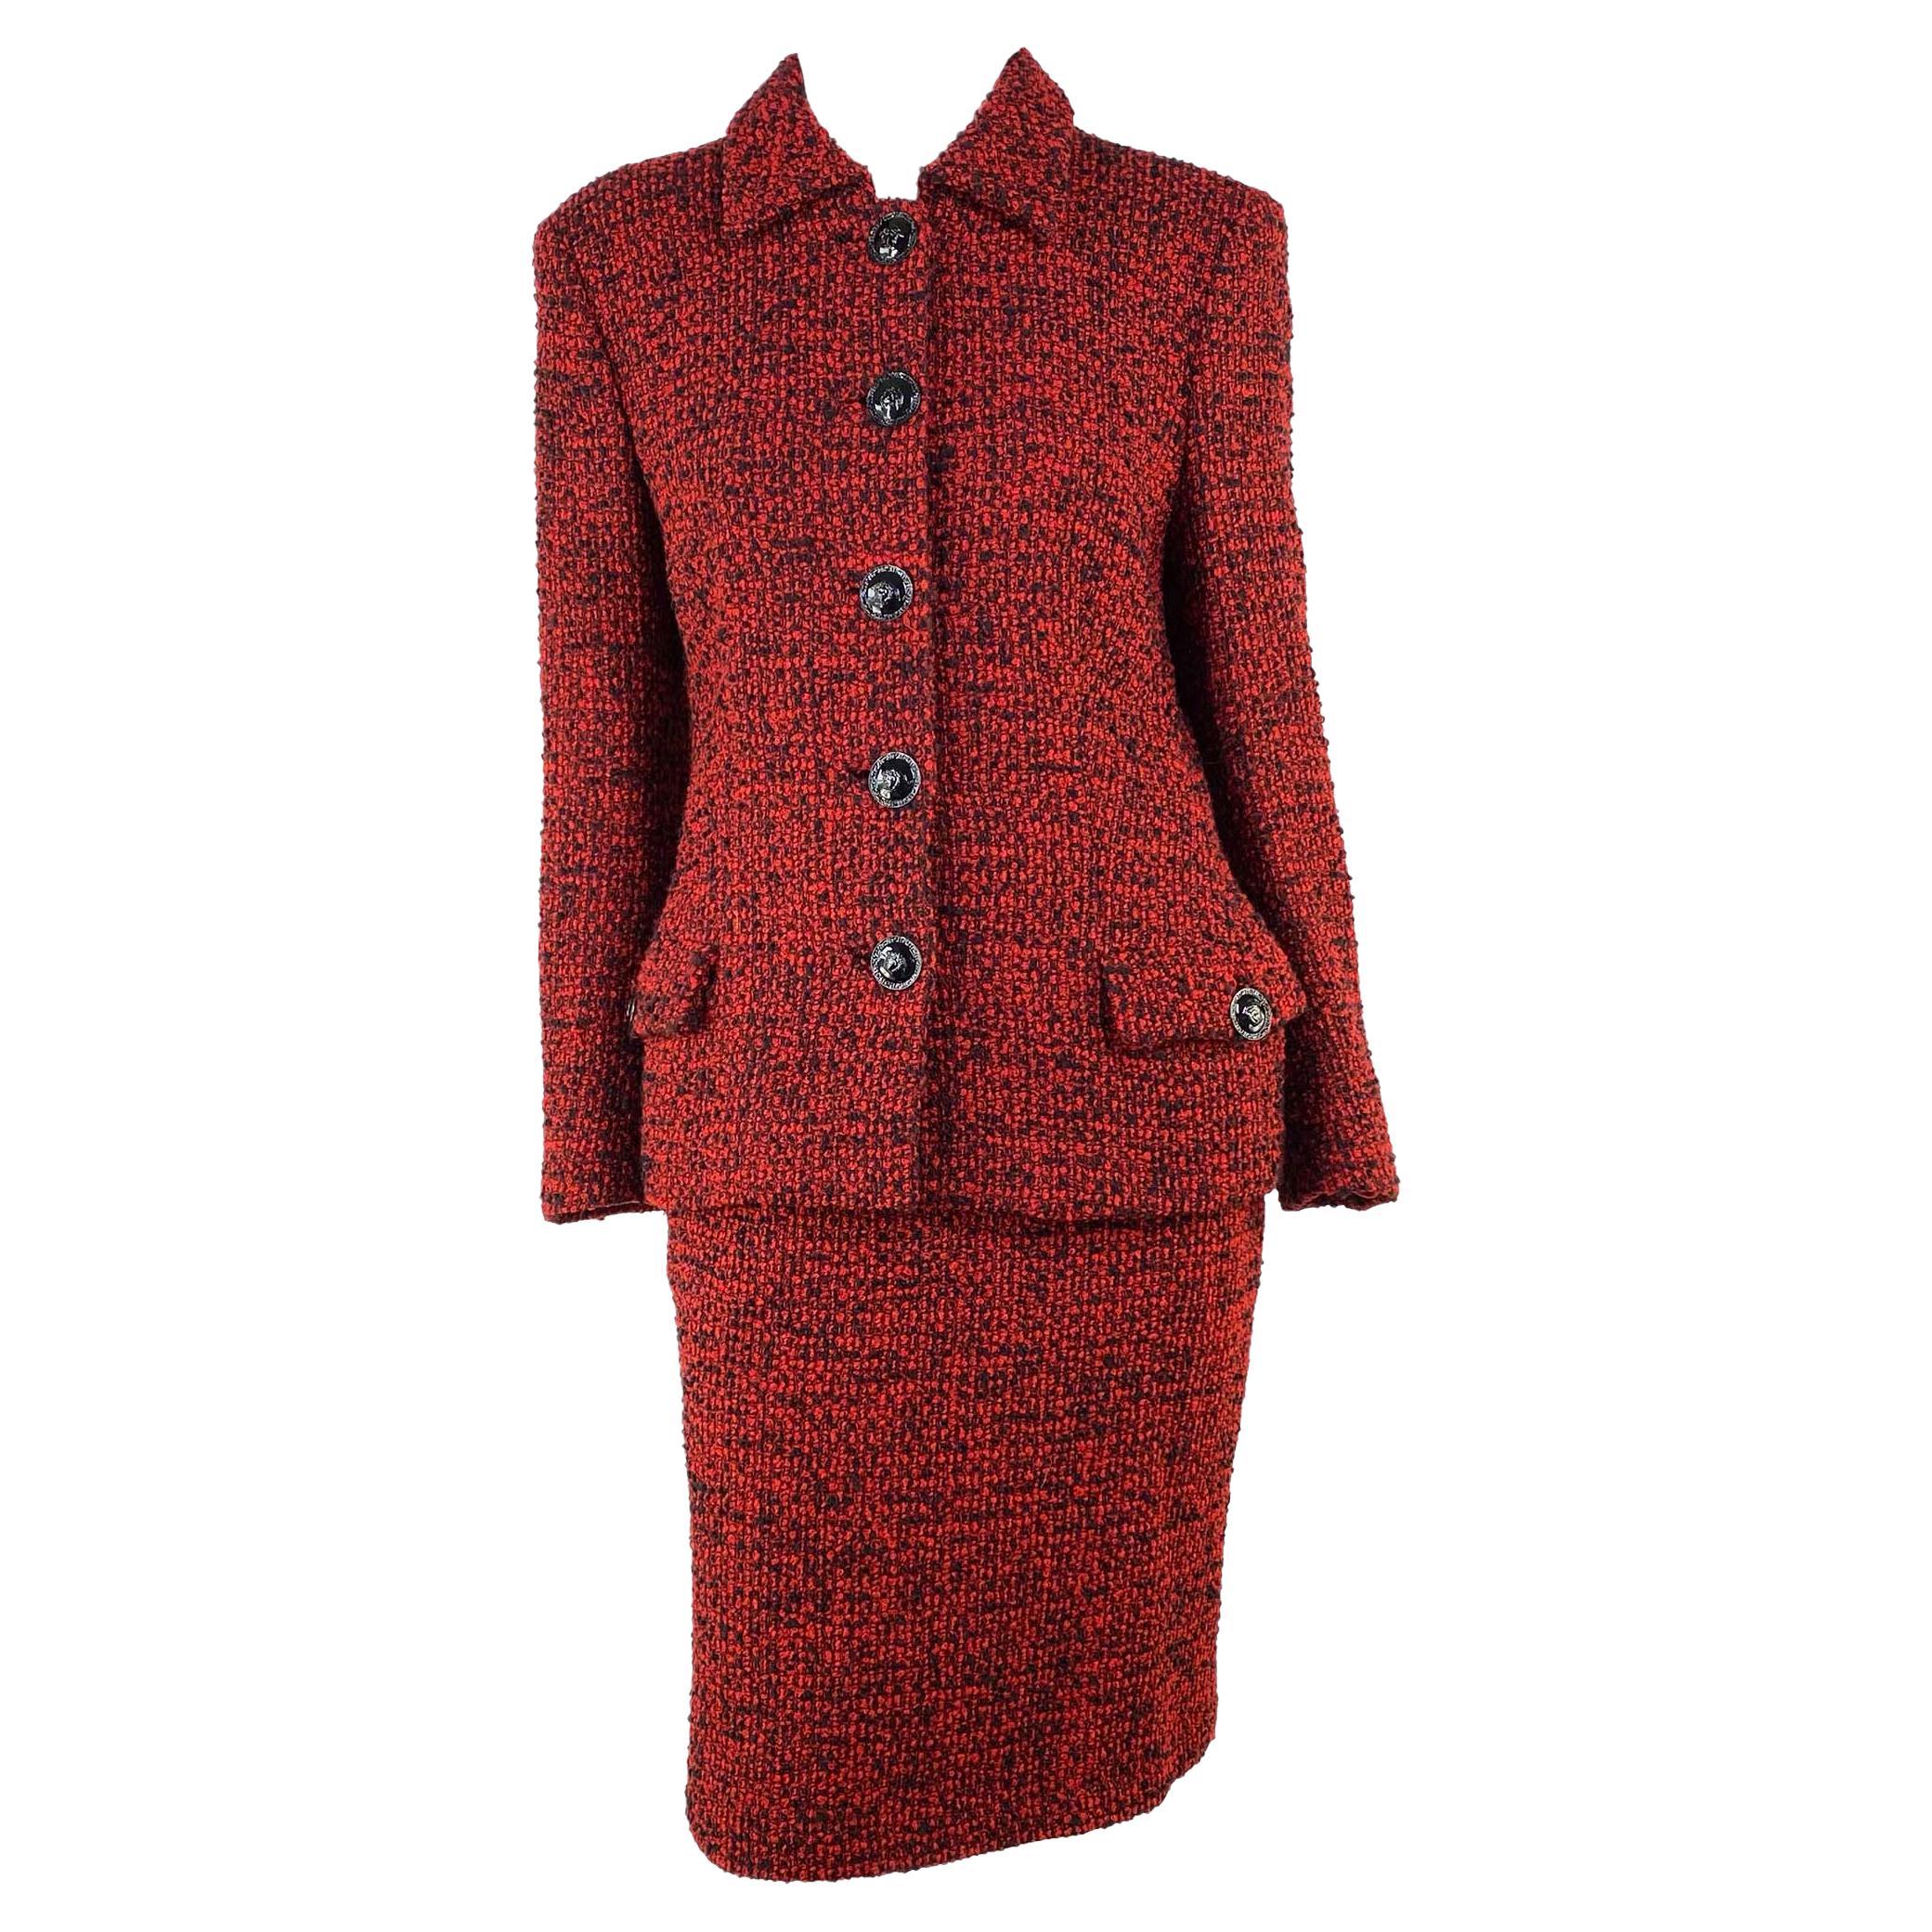 F/W 1995 Gianni Versace Couture Runway Red Bouclé Tweed Skirt Suit Documented 